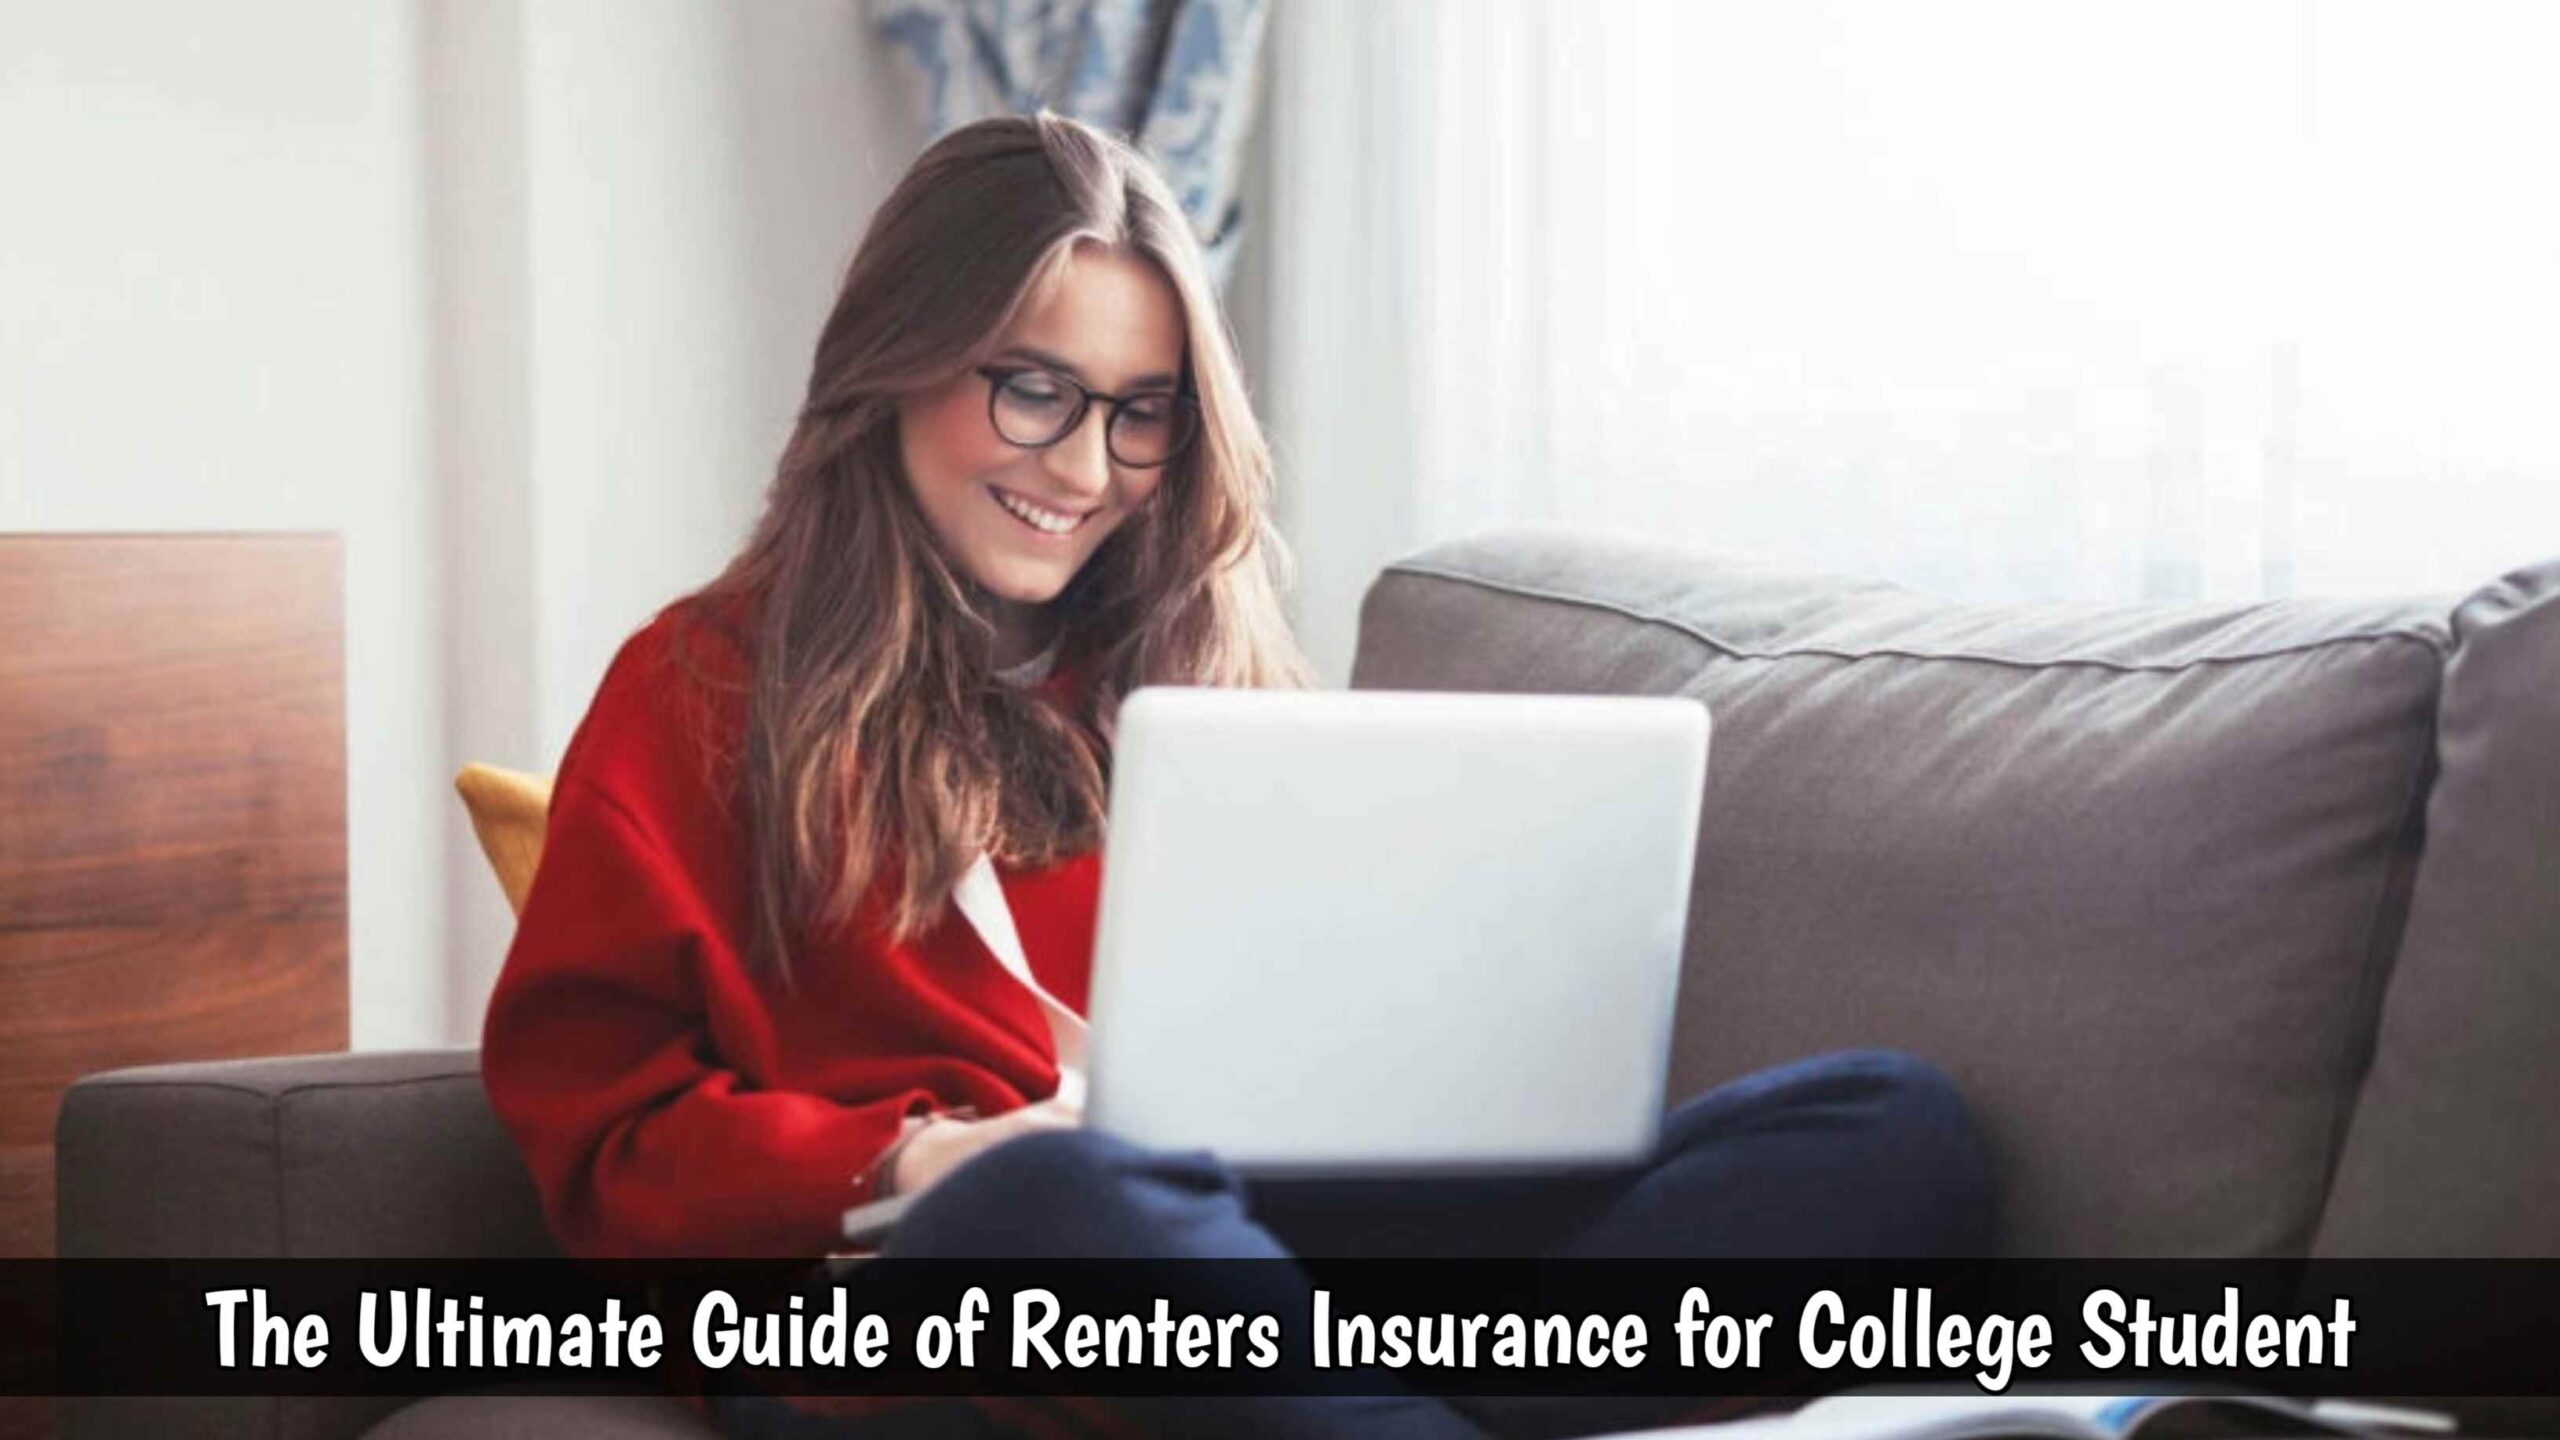 The Ultimate Guide of Renters Insurance for College Student